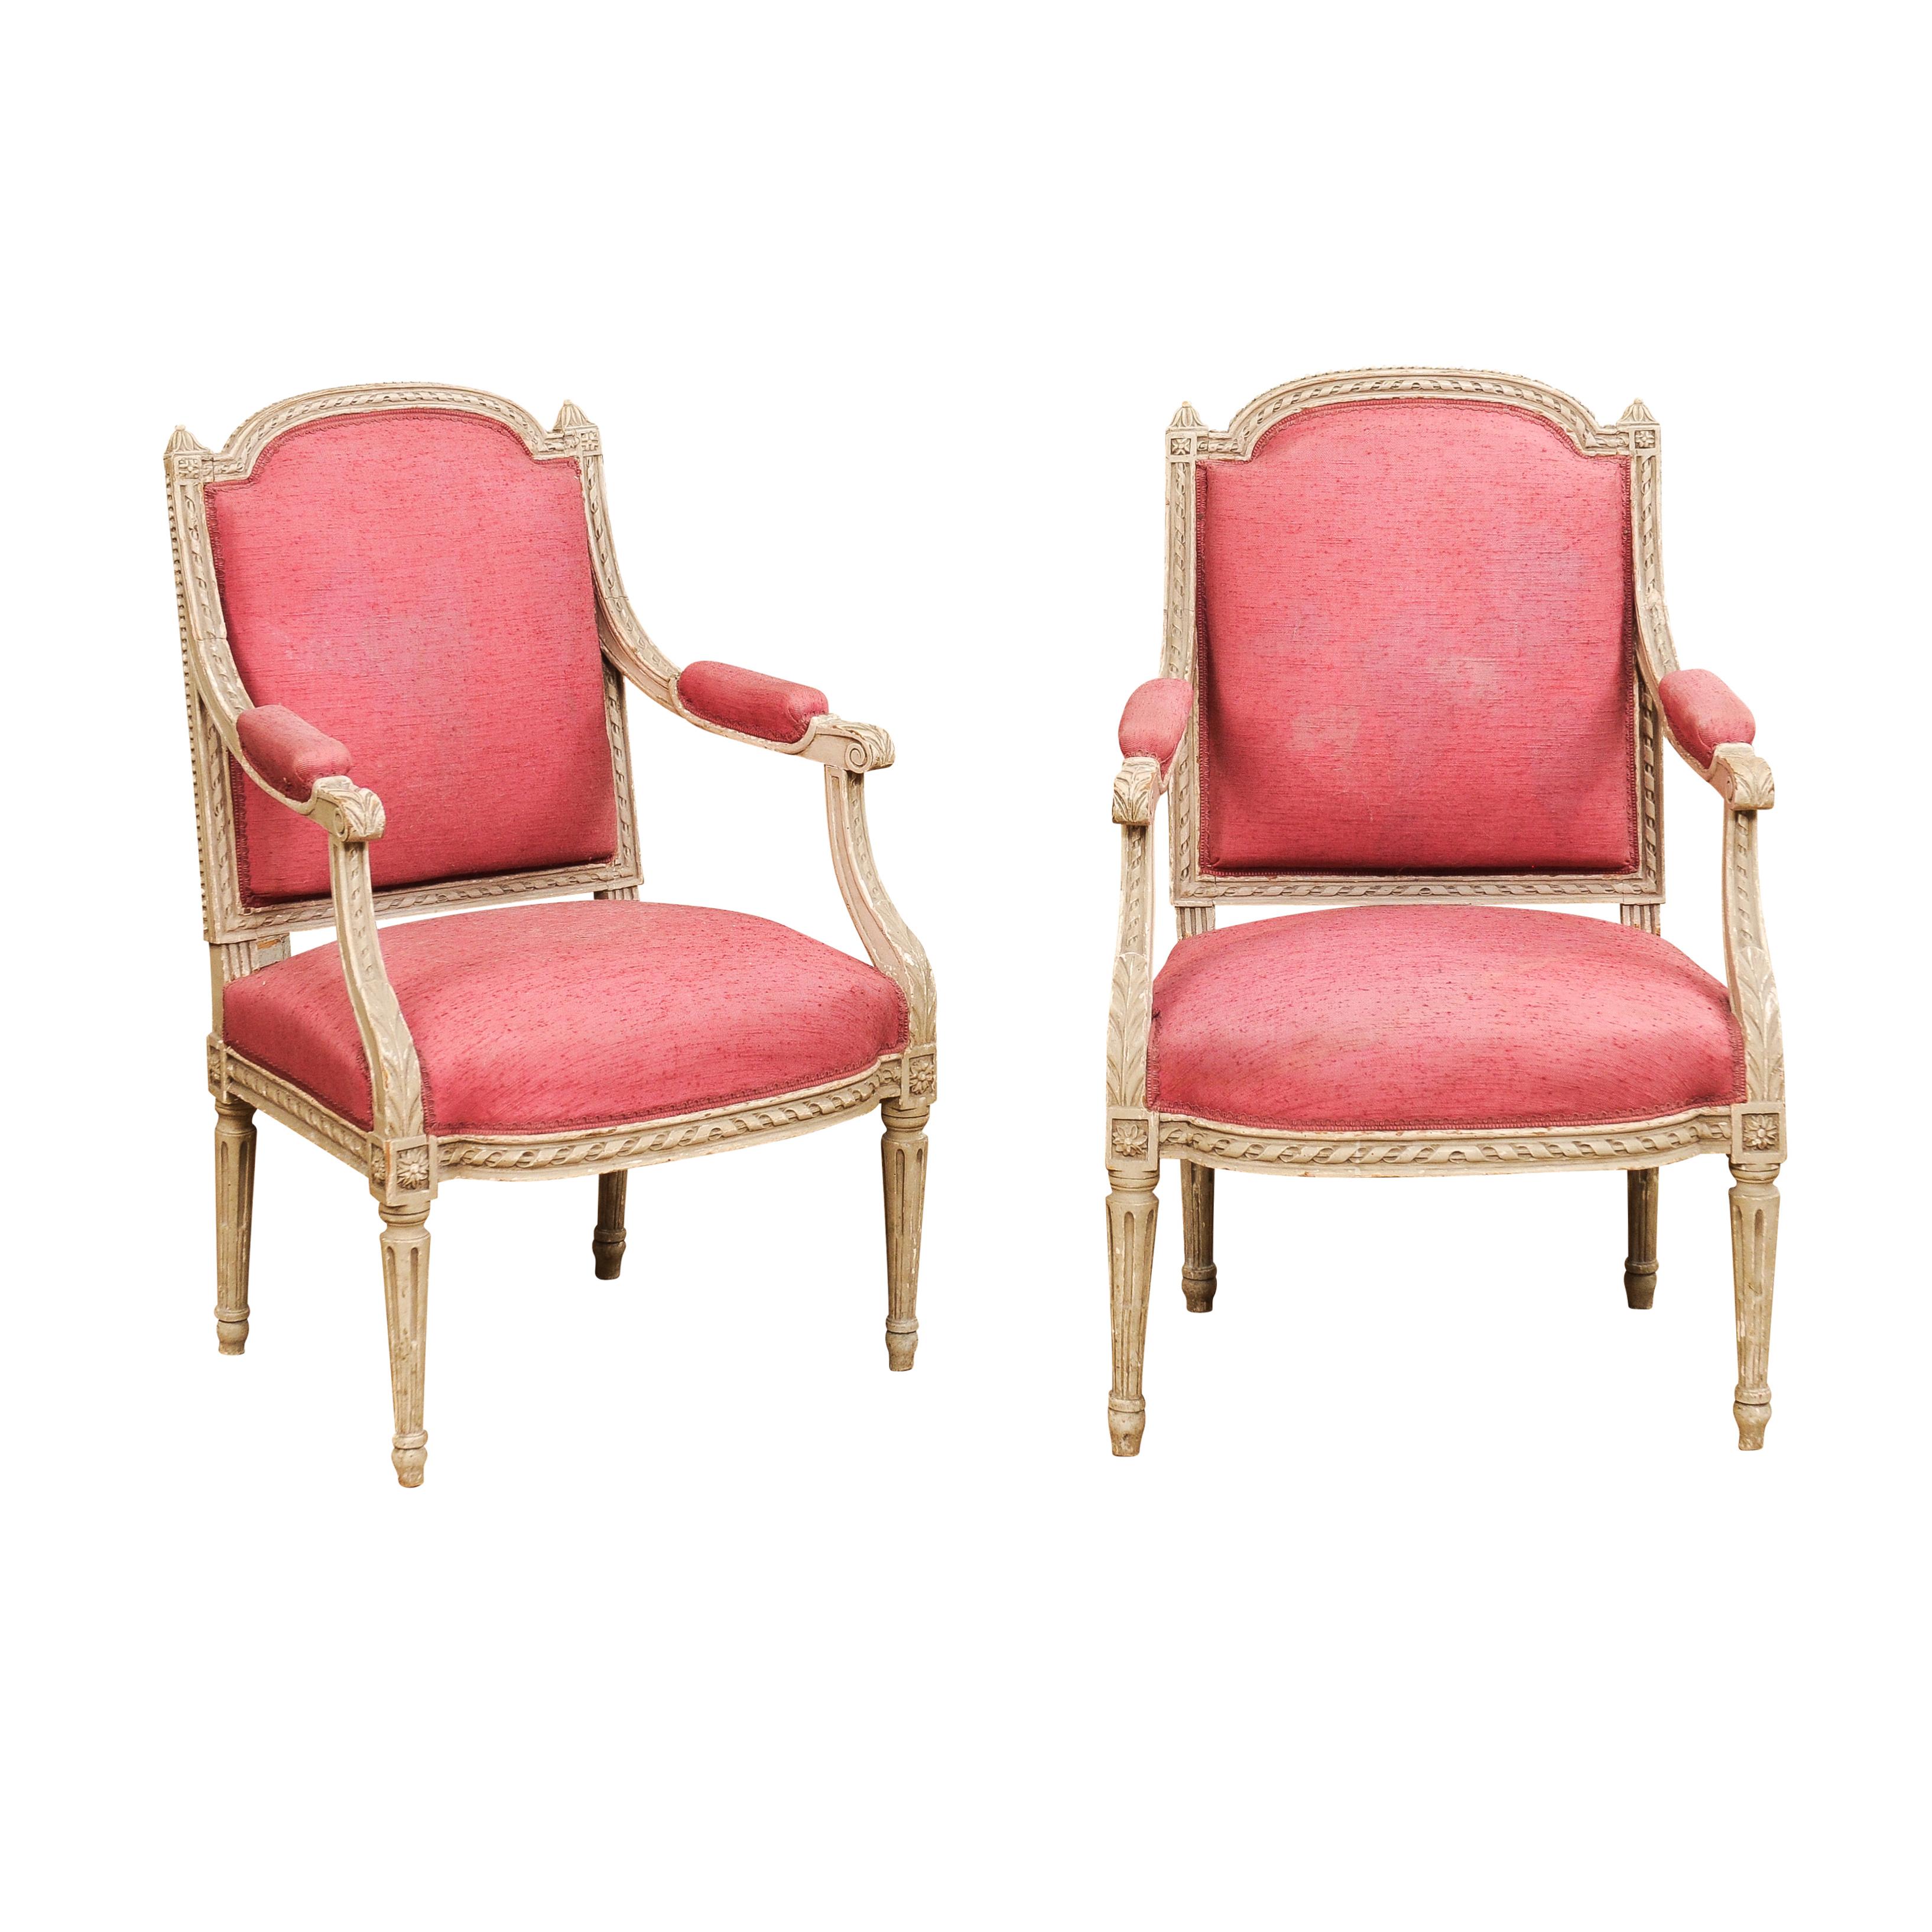 Two French Louis XVI style painted wood armchairs from the 19th century with carved décor including twisted rope motifs, acanthus leaves, rosettes and petite beads. These French Louis XVI style painted wood armchairs from the 19th century are an